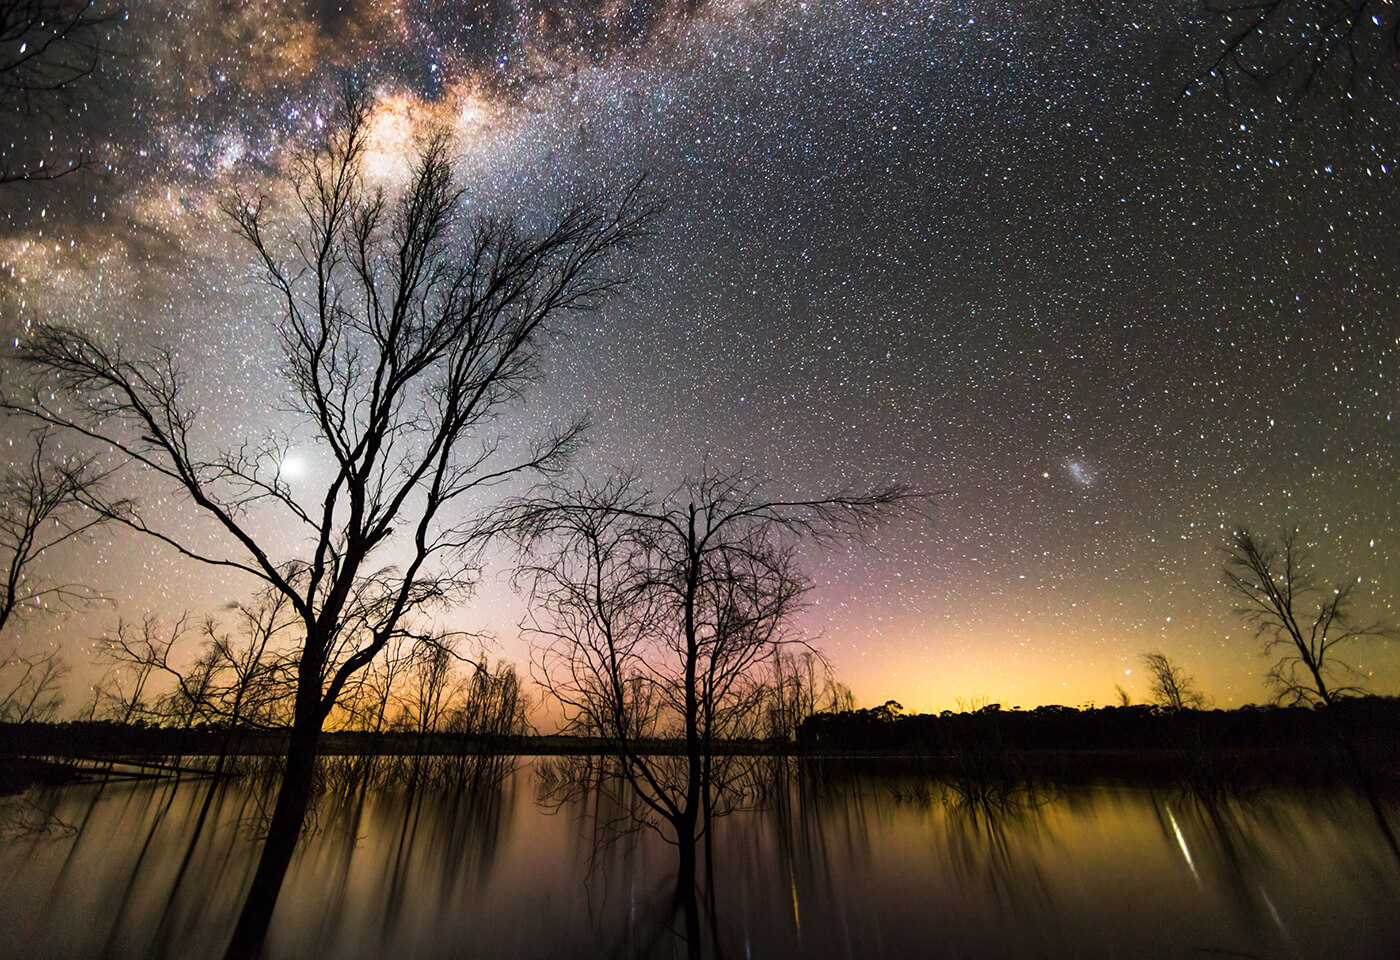 Astrophotography Tips from Phil Hart